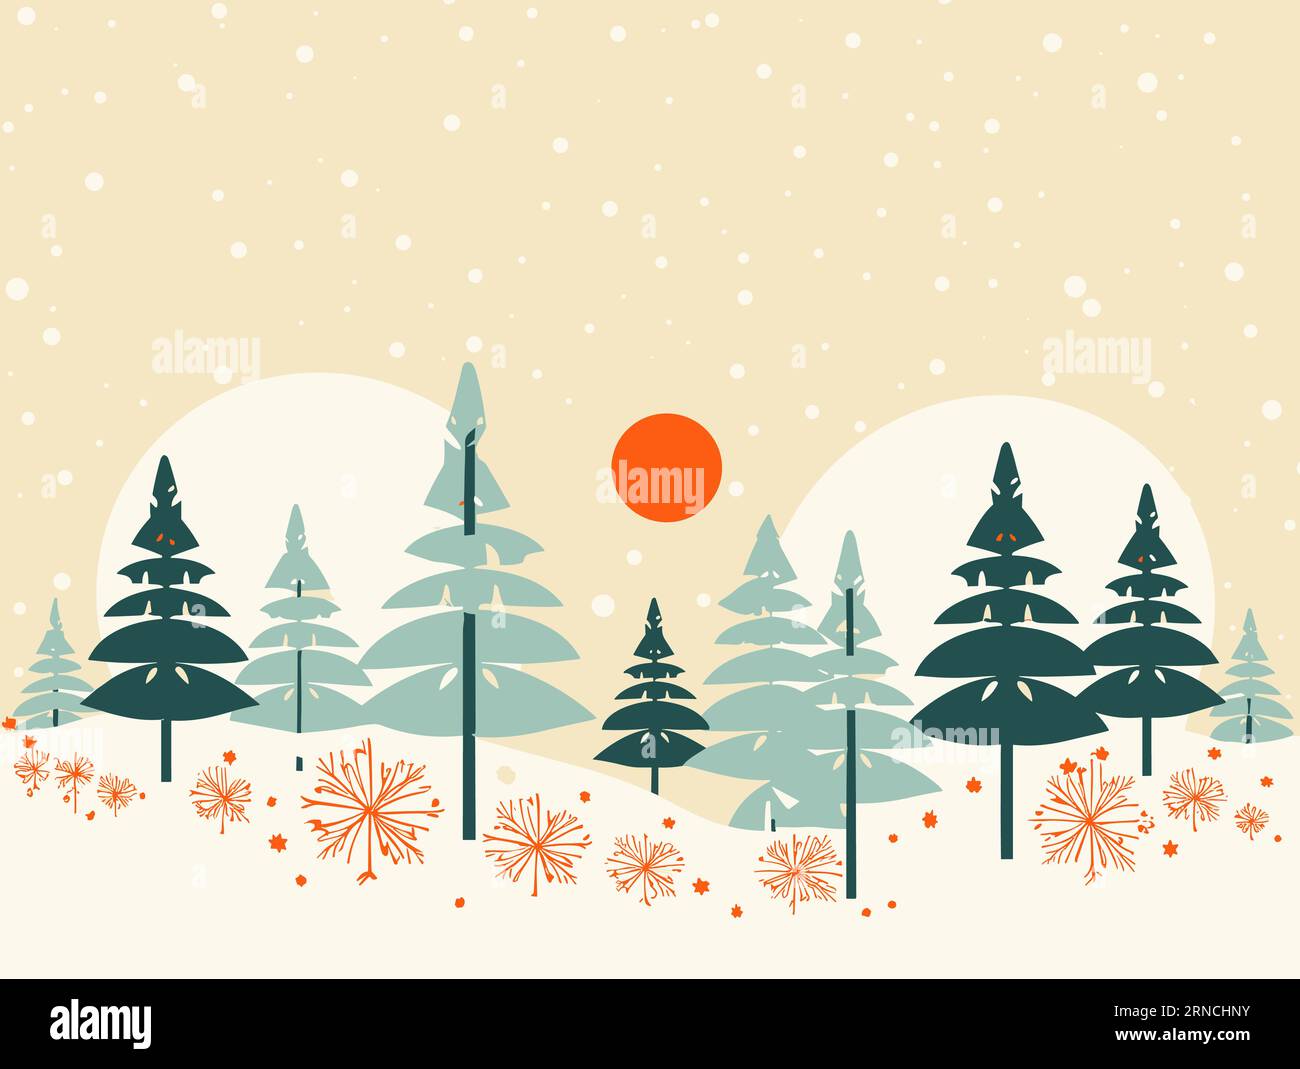 Christmas Trees In The Style Of Mid-Century Illustration, Sky-Blue And Amber, Flickr, Bold And Colorful Graphic Design, Disturbingly Whimsical, Decora Stock Vector